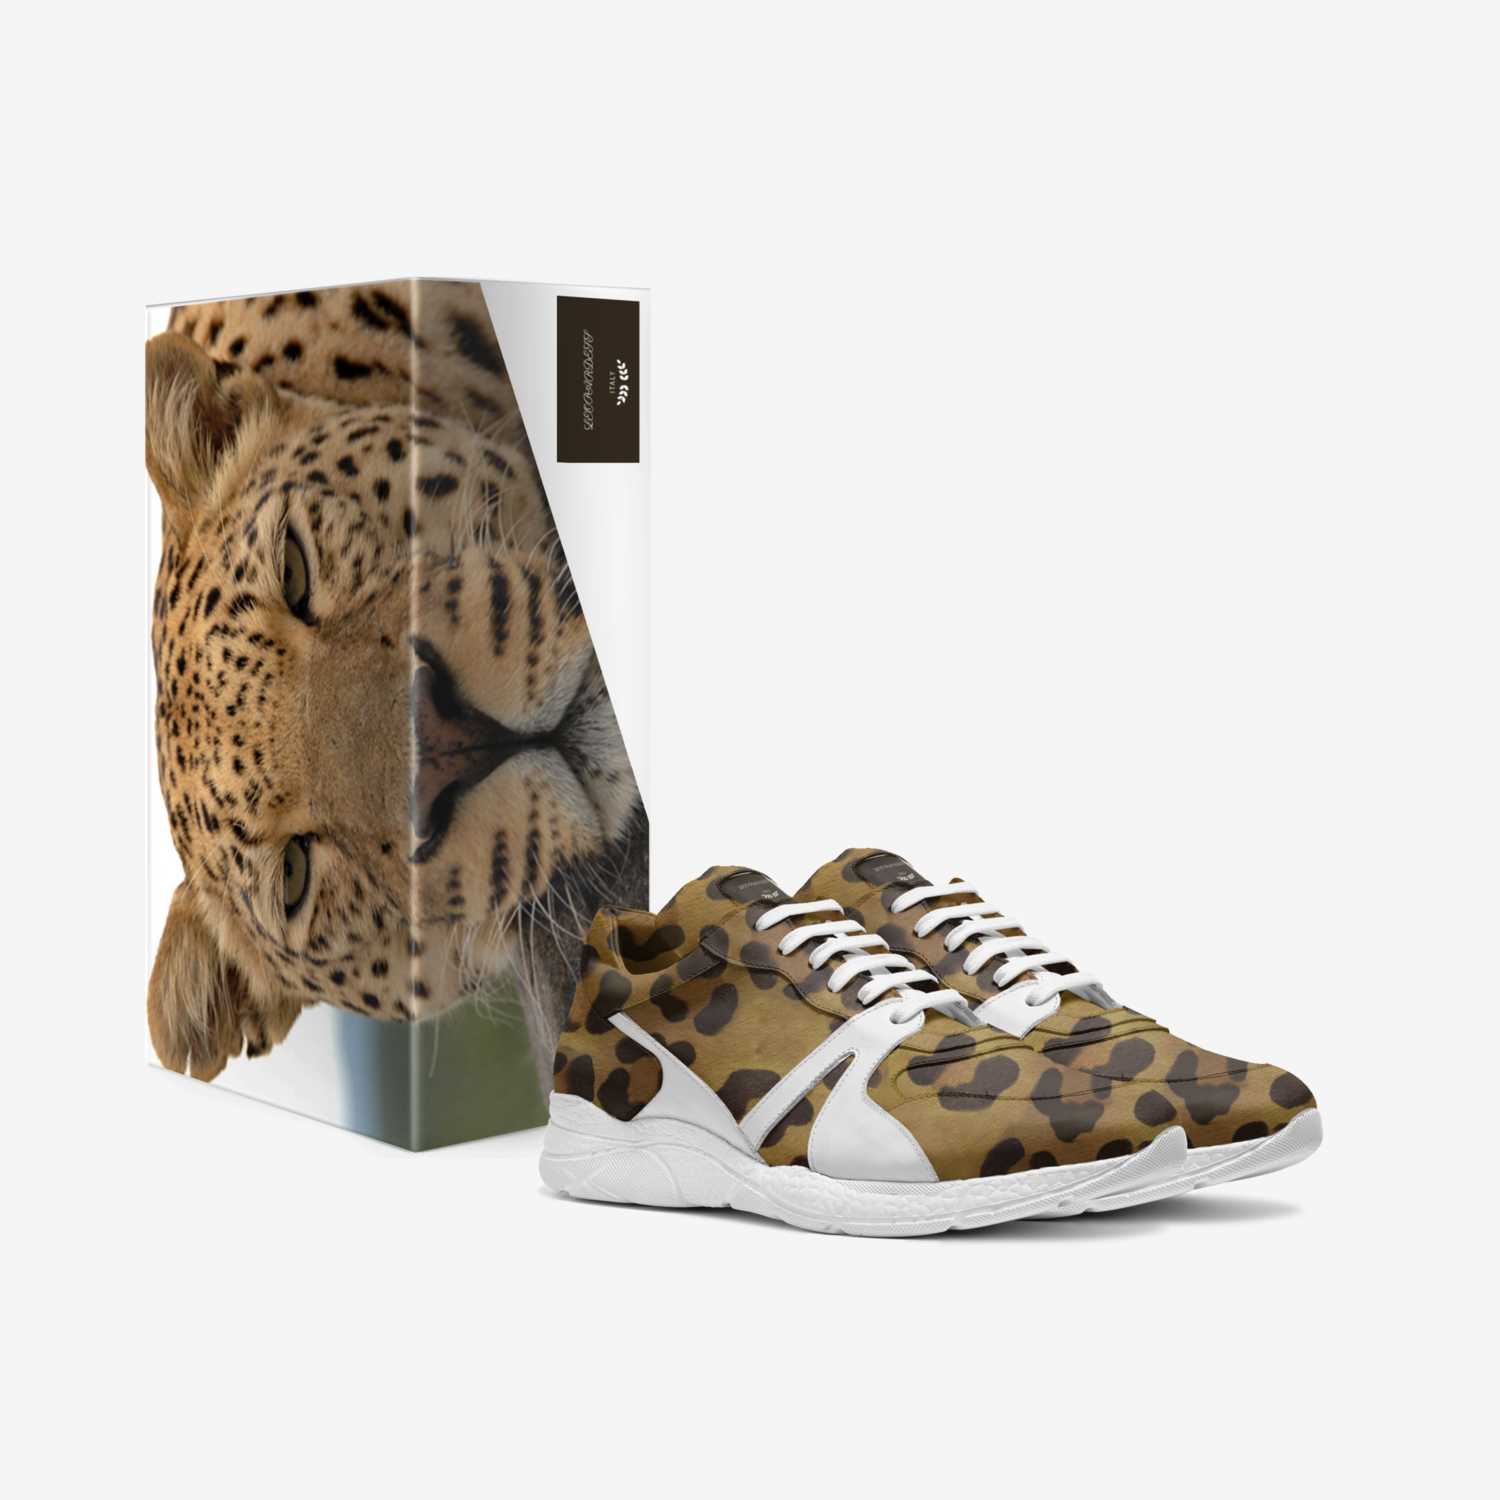 LEOPARDESS custom made in Italy shoes by Devontae Jackson | Box view